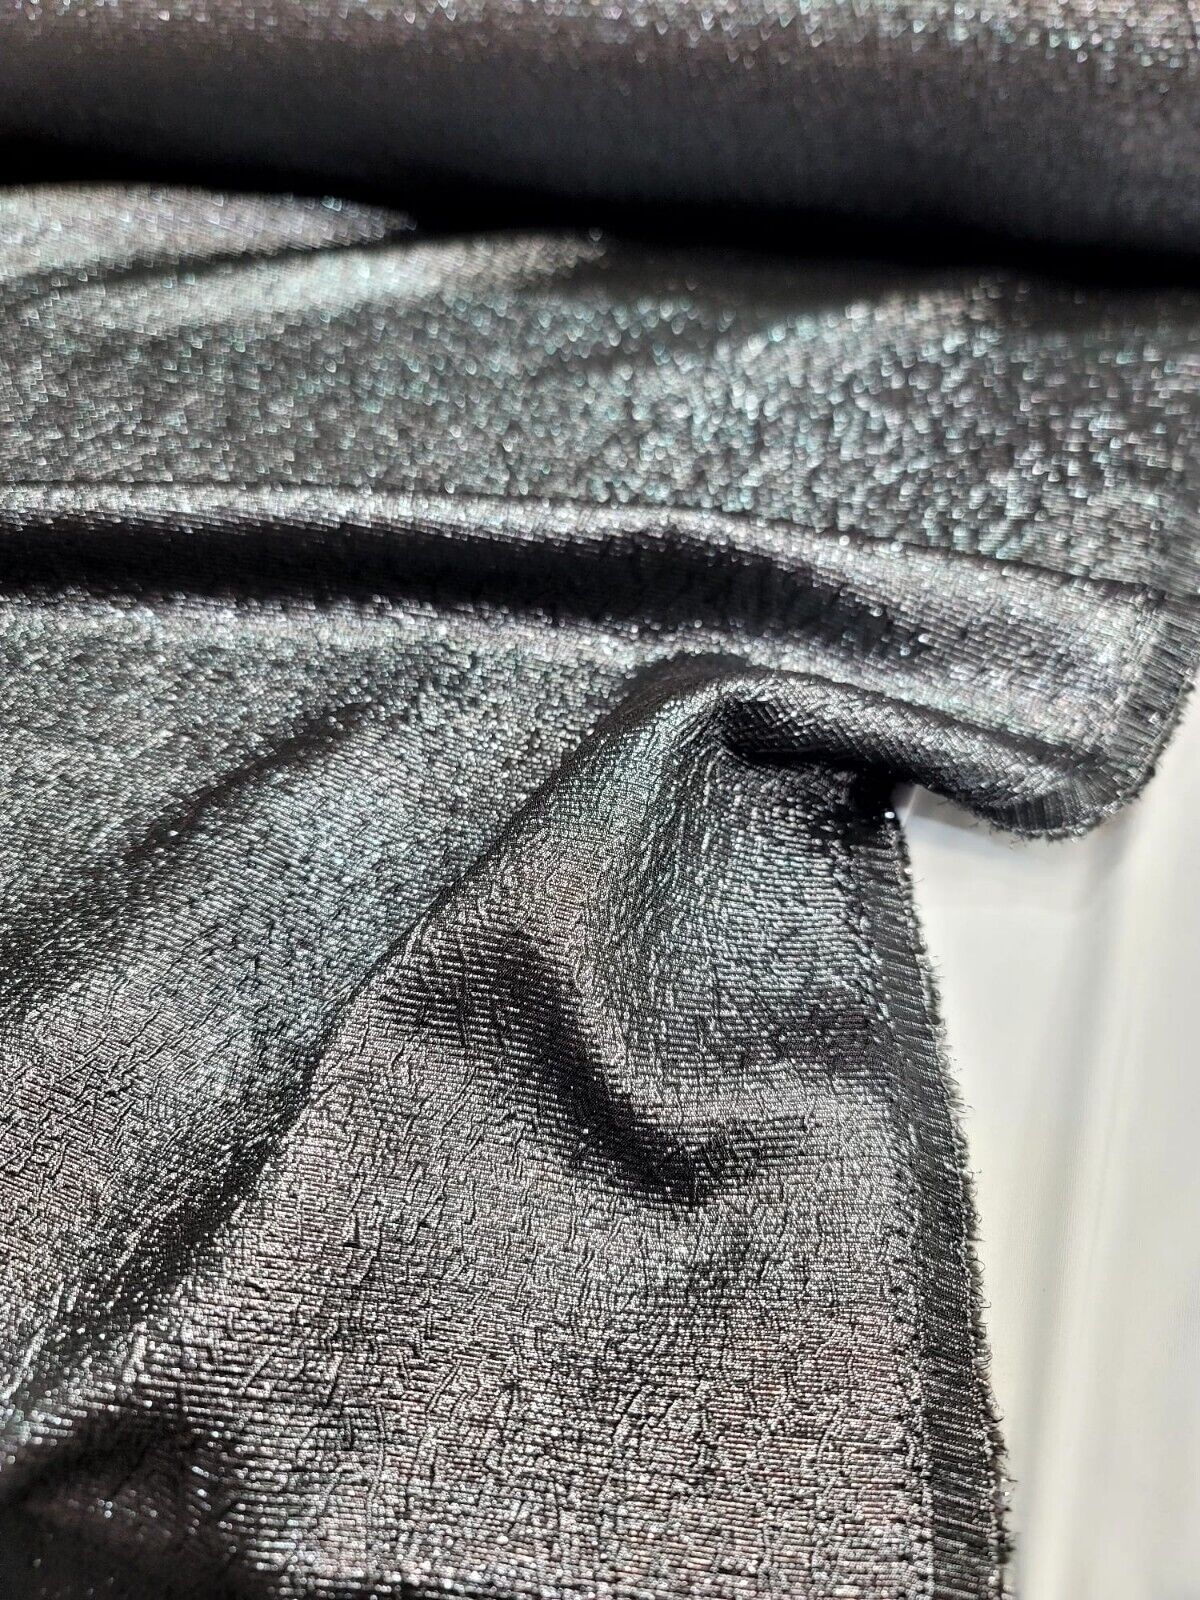 Charcoal Gray Metallic Brocade Jacquard Fabric - Sold by the Yard - Dress Gown Embossed